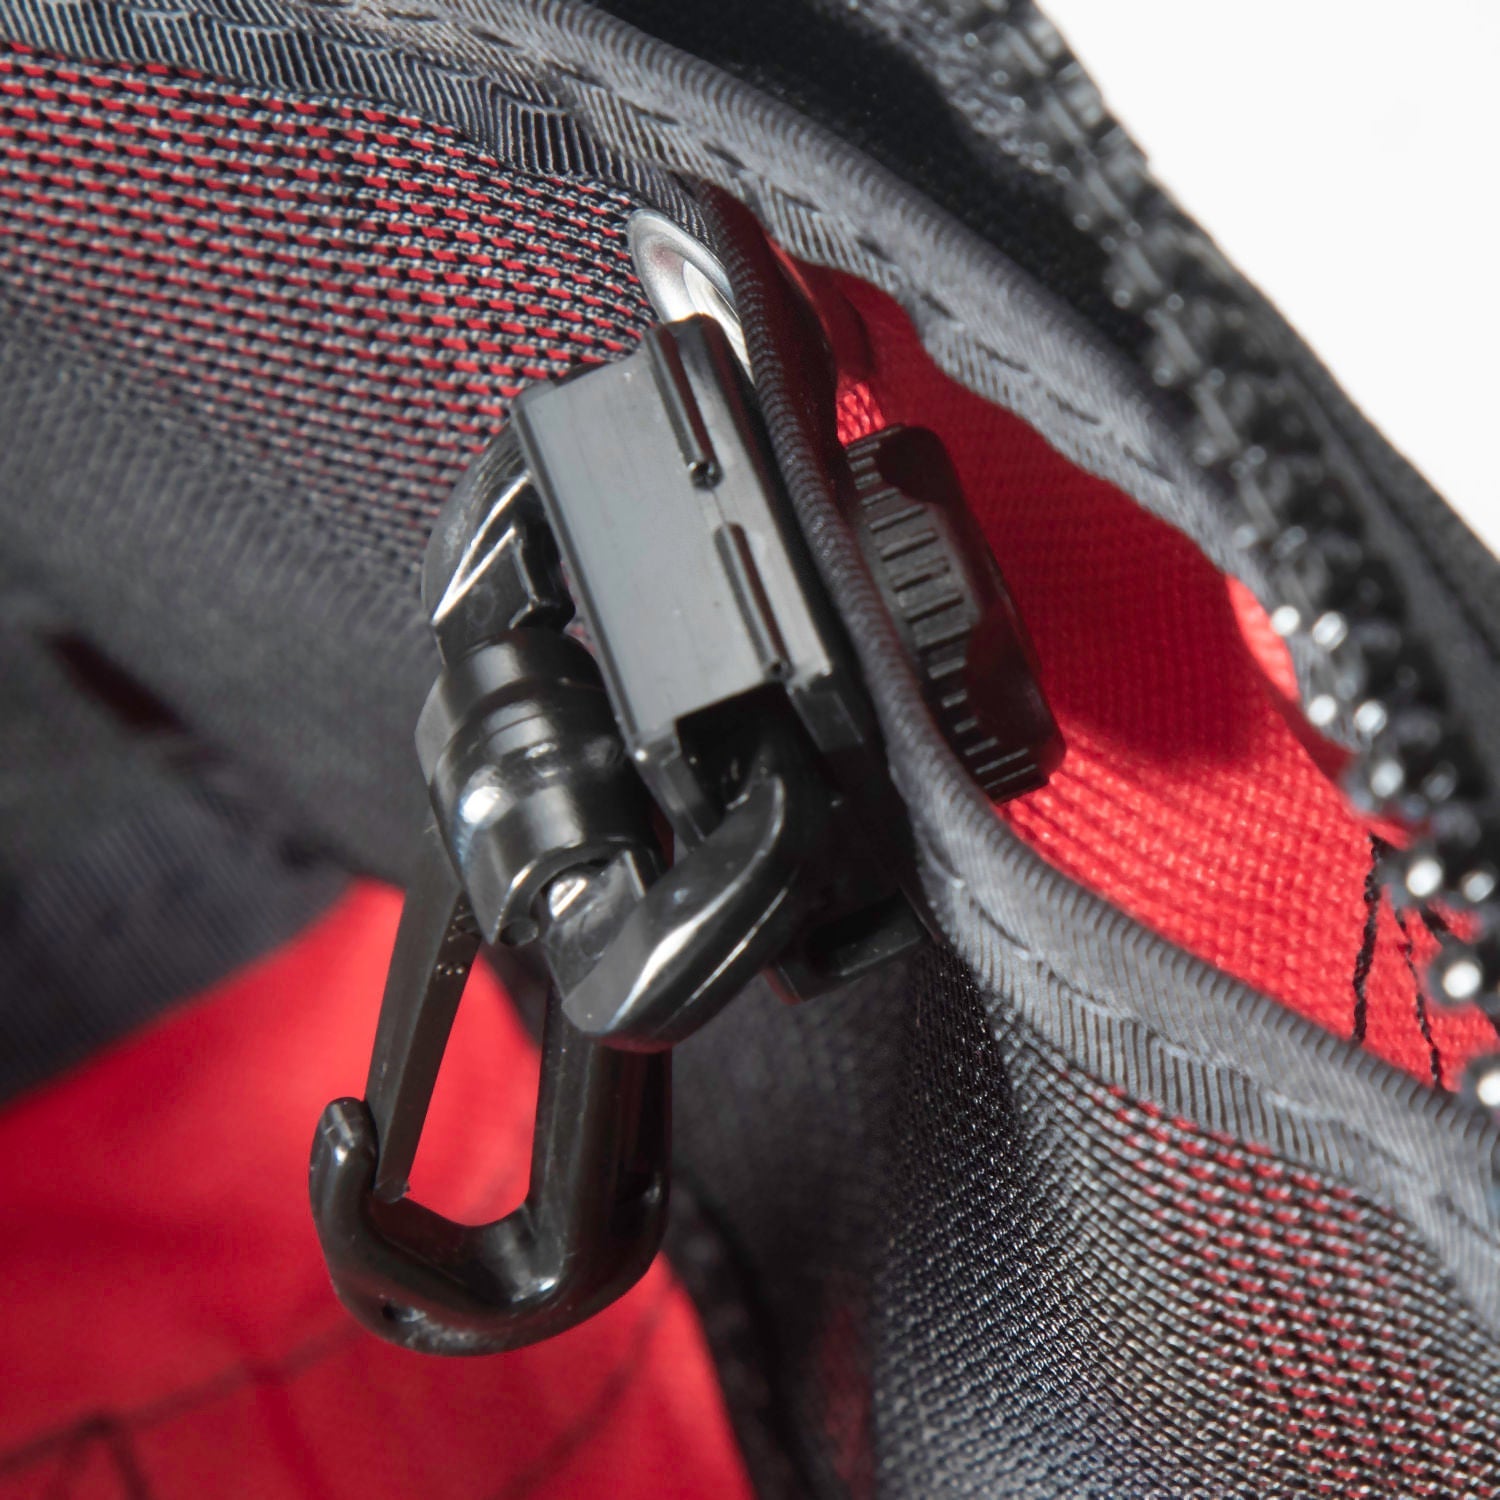 Key Clip installed to interior of Red Oxx bag.